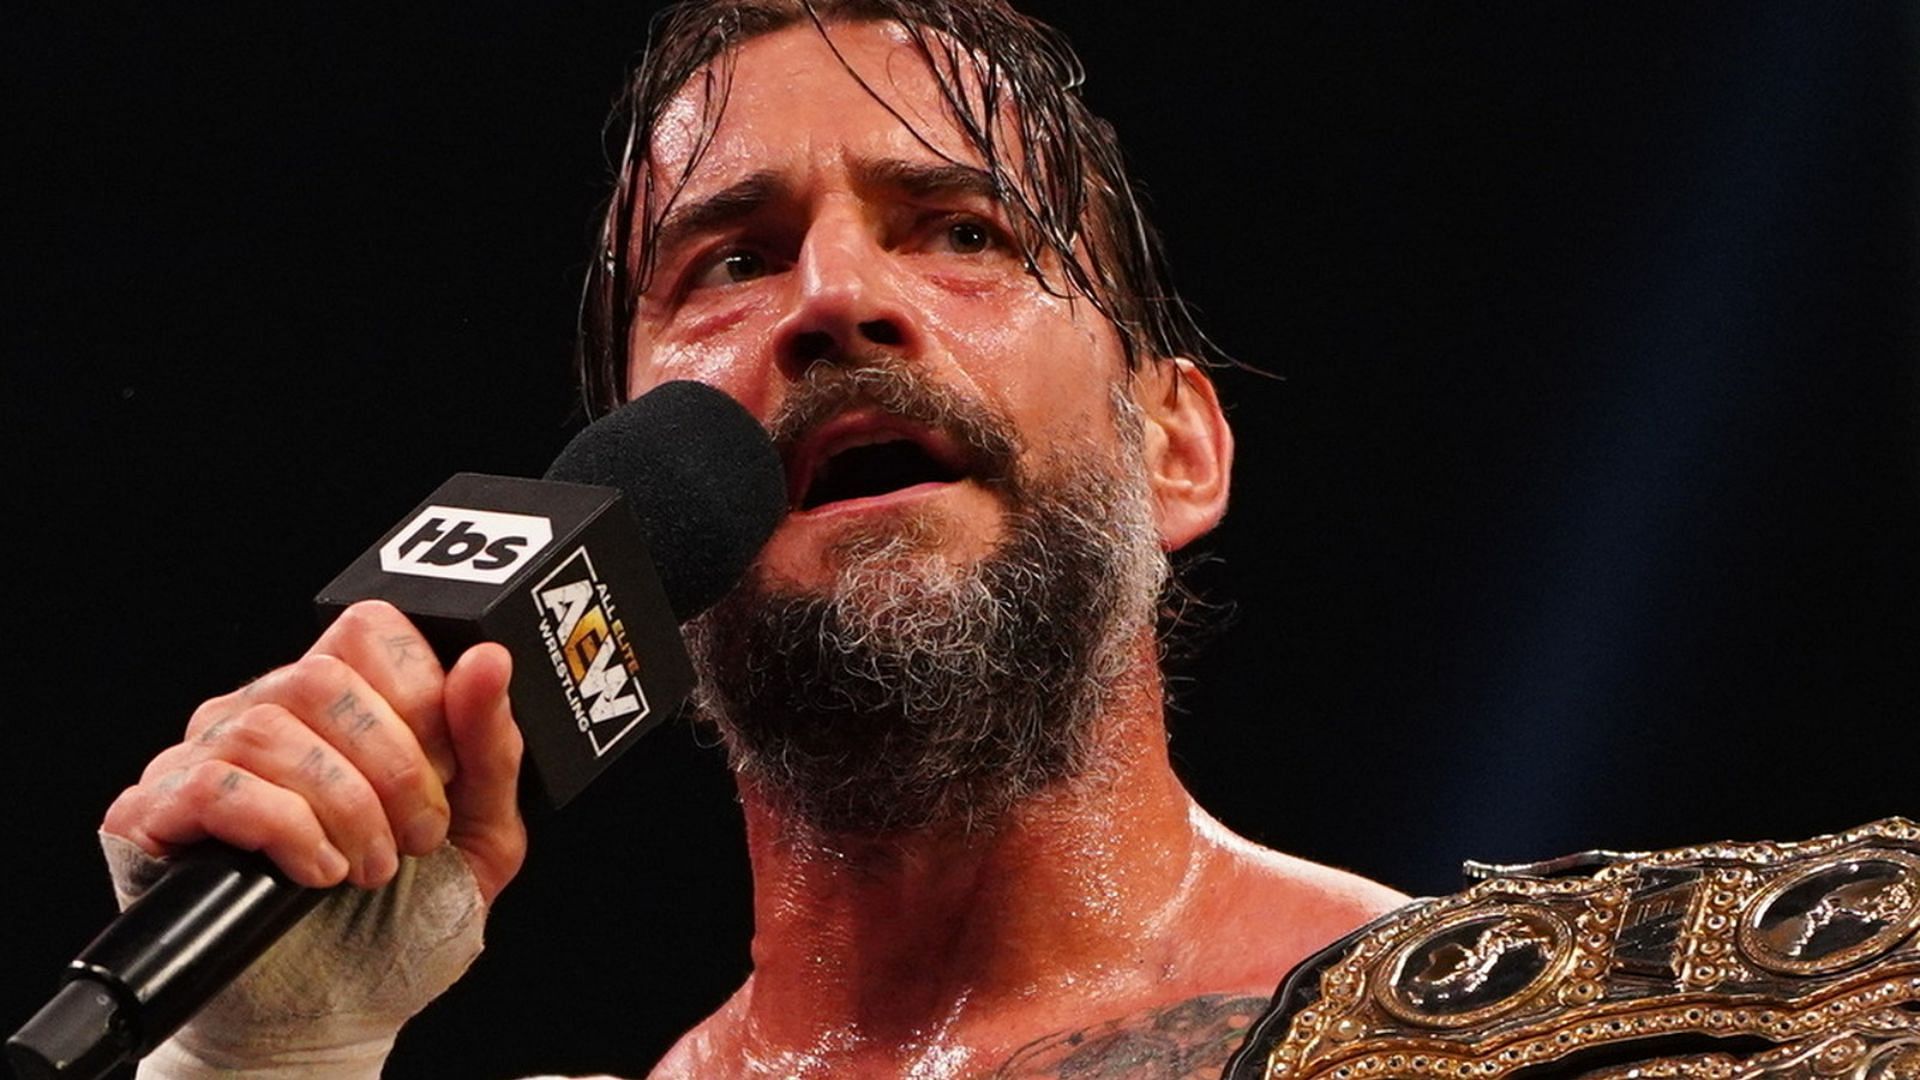 Could the presence of CM Punk allow this star to return to AEW?